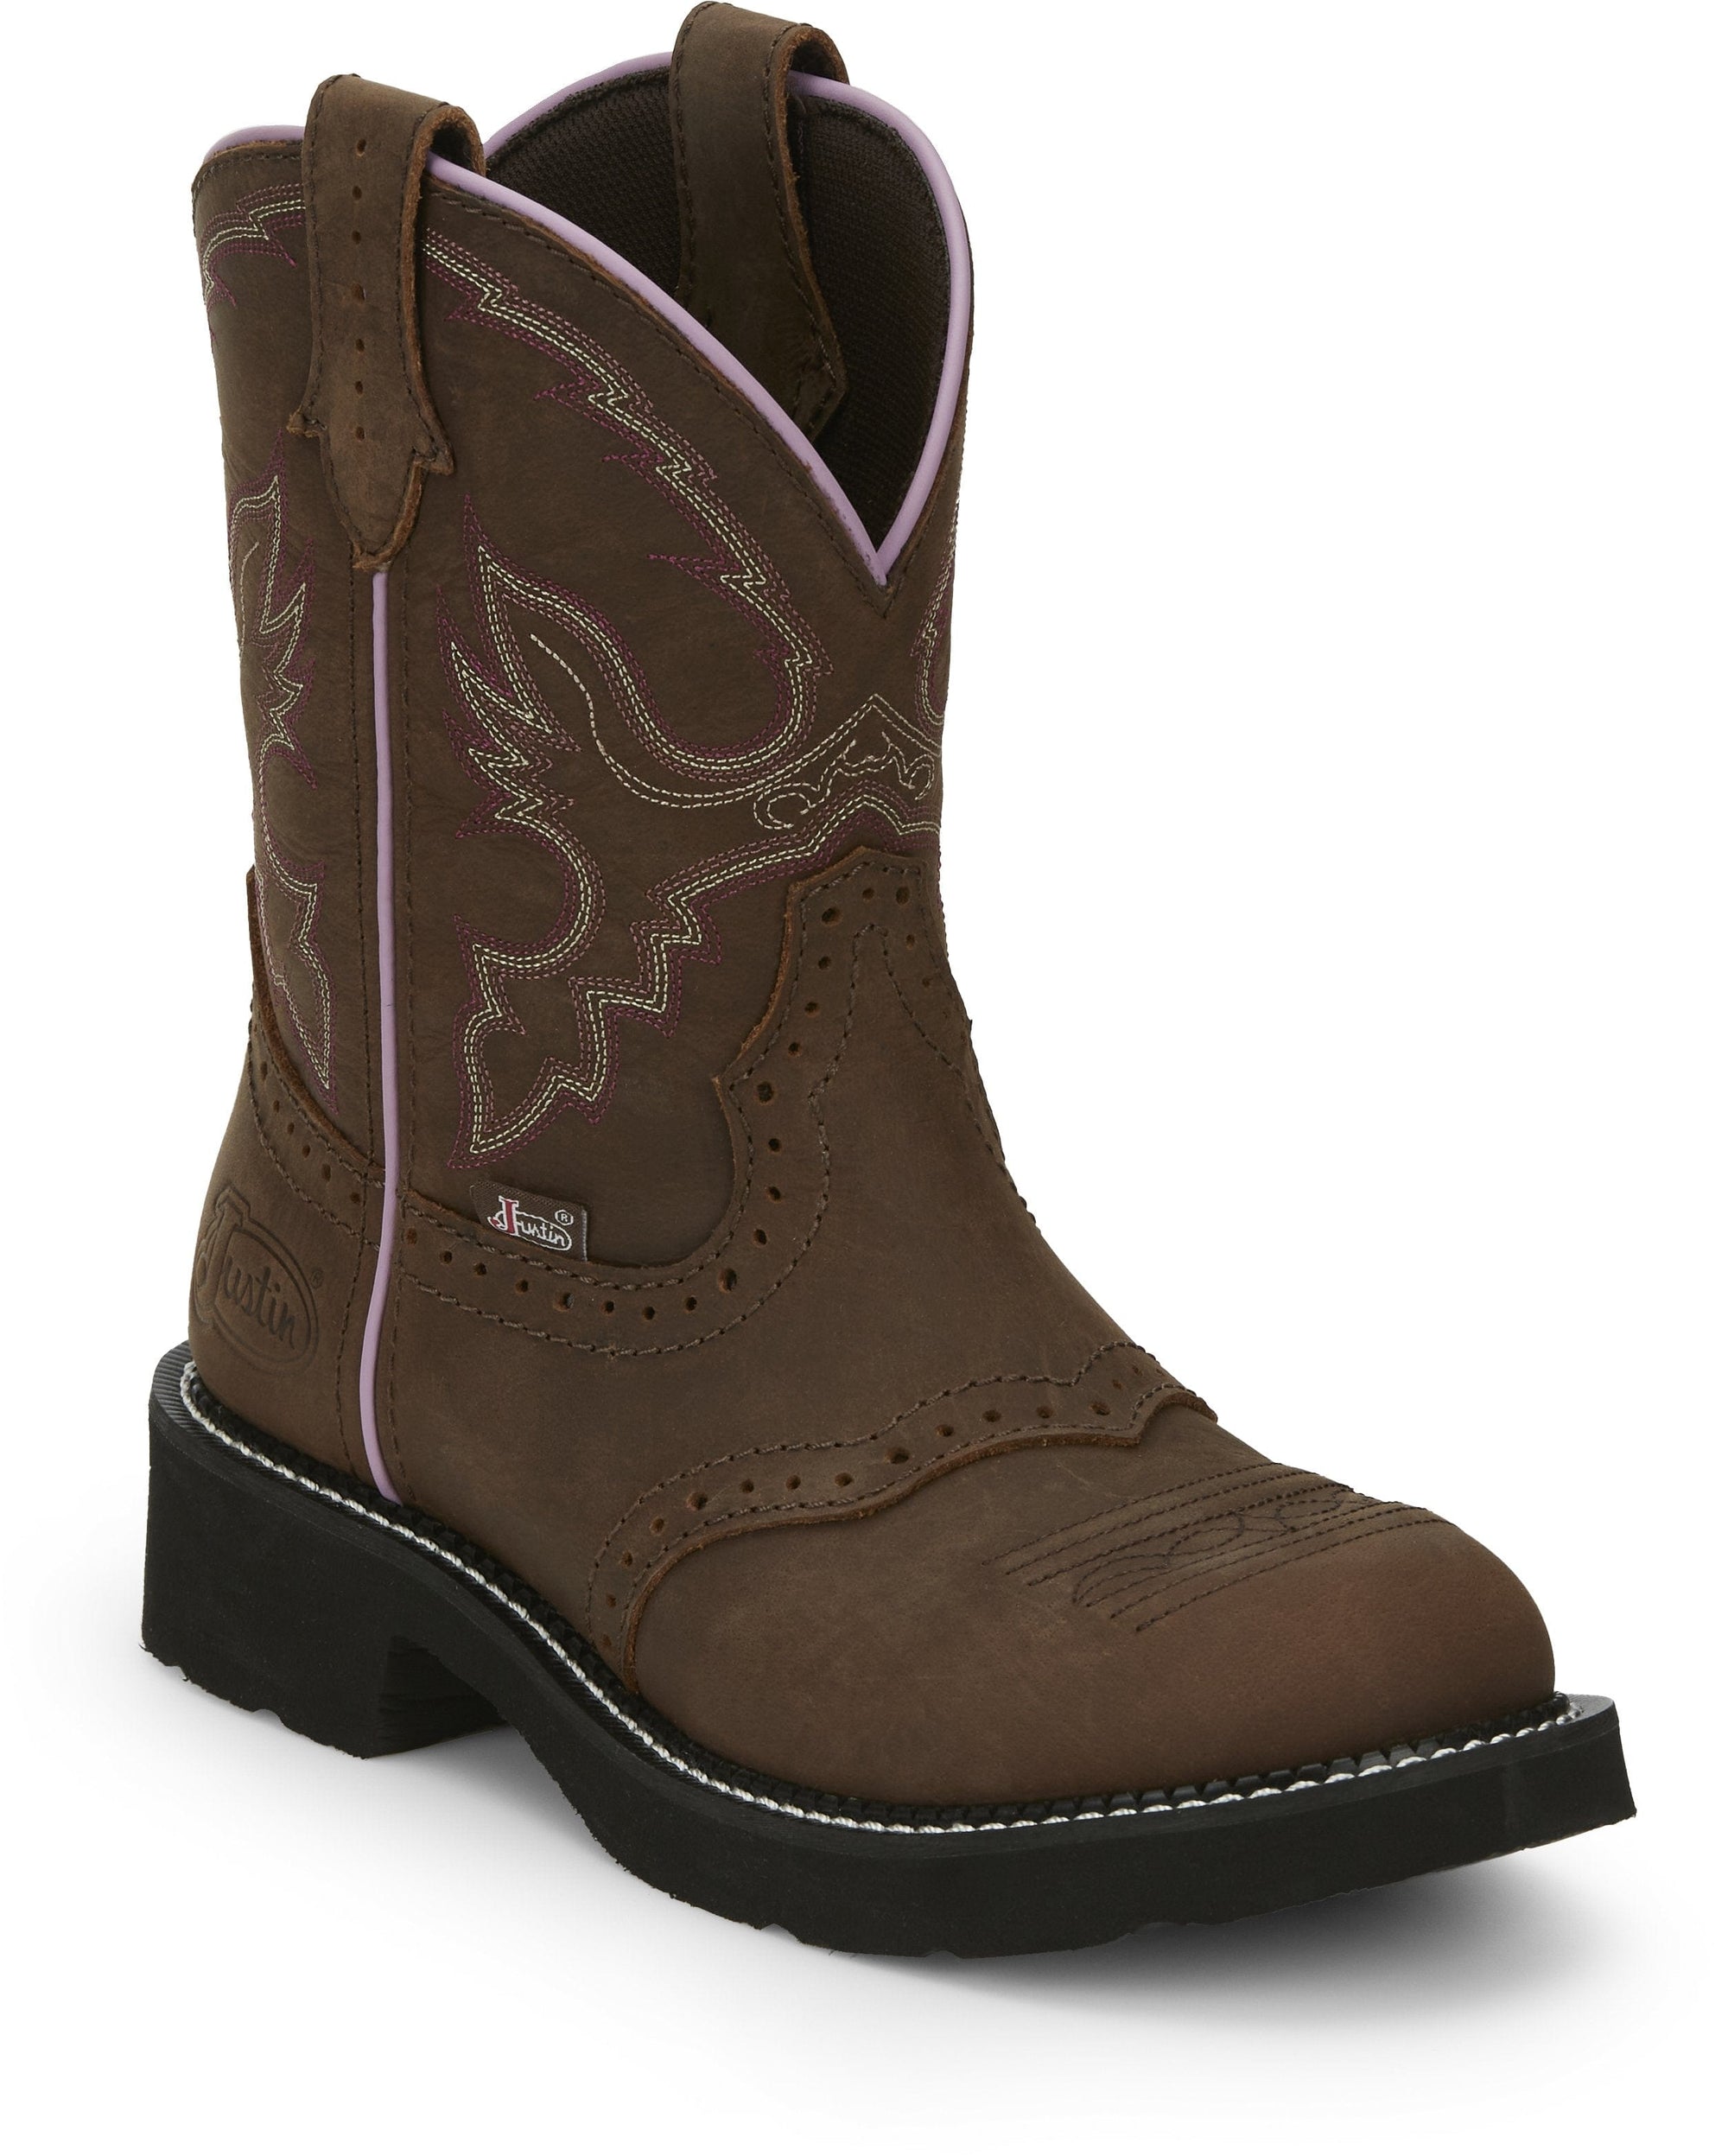 Justin Boots Boots Justin Women's Gypsy Gemma Rustic Aged Bark Round Toe Western Boots - GY9903